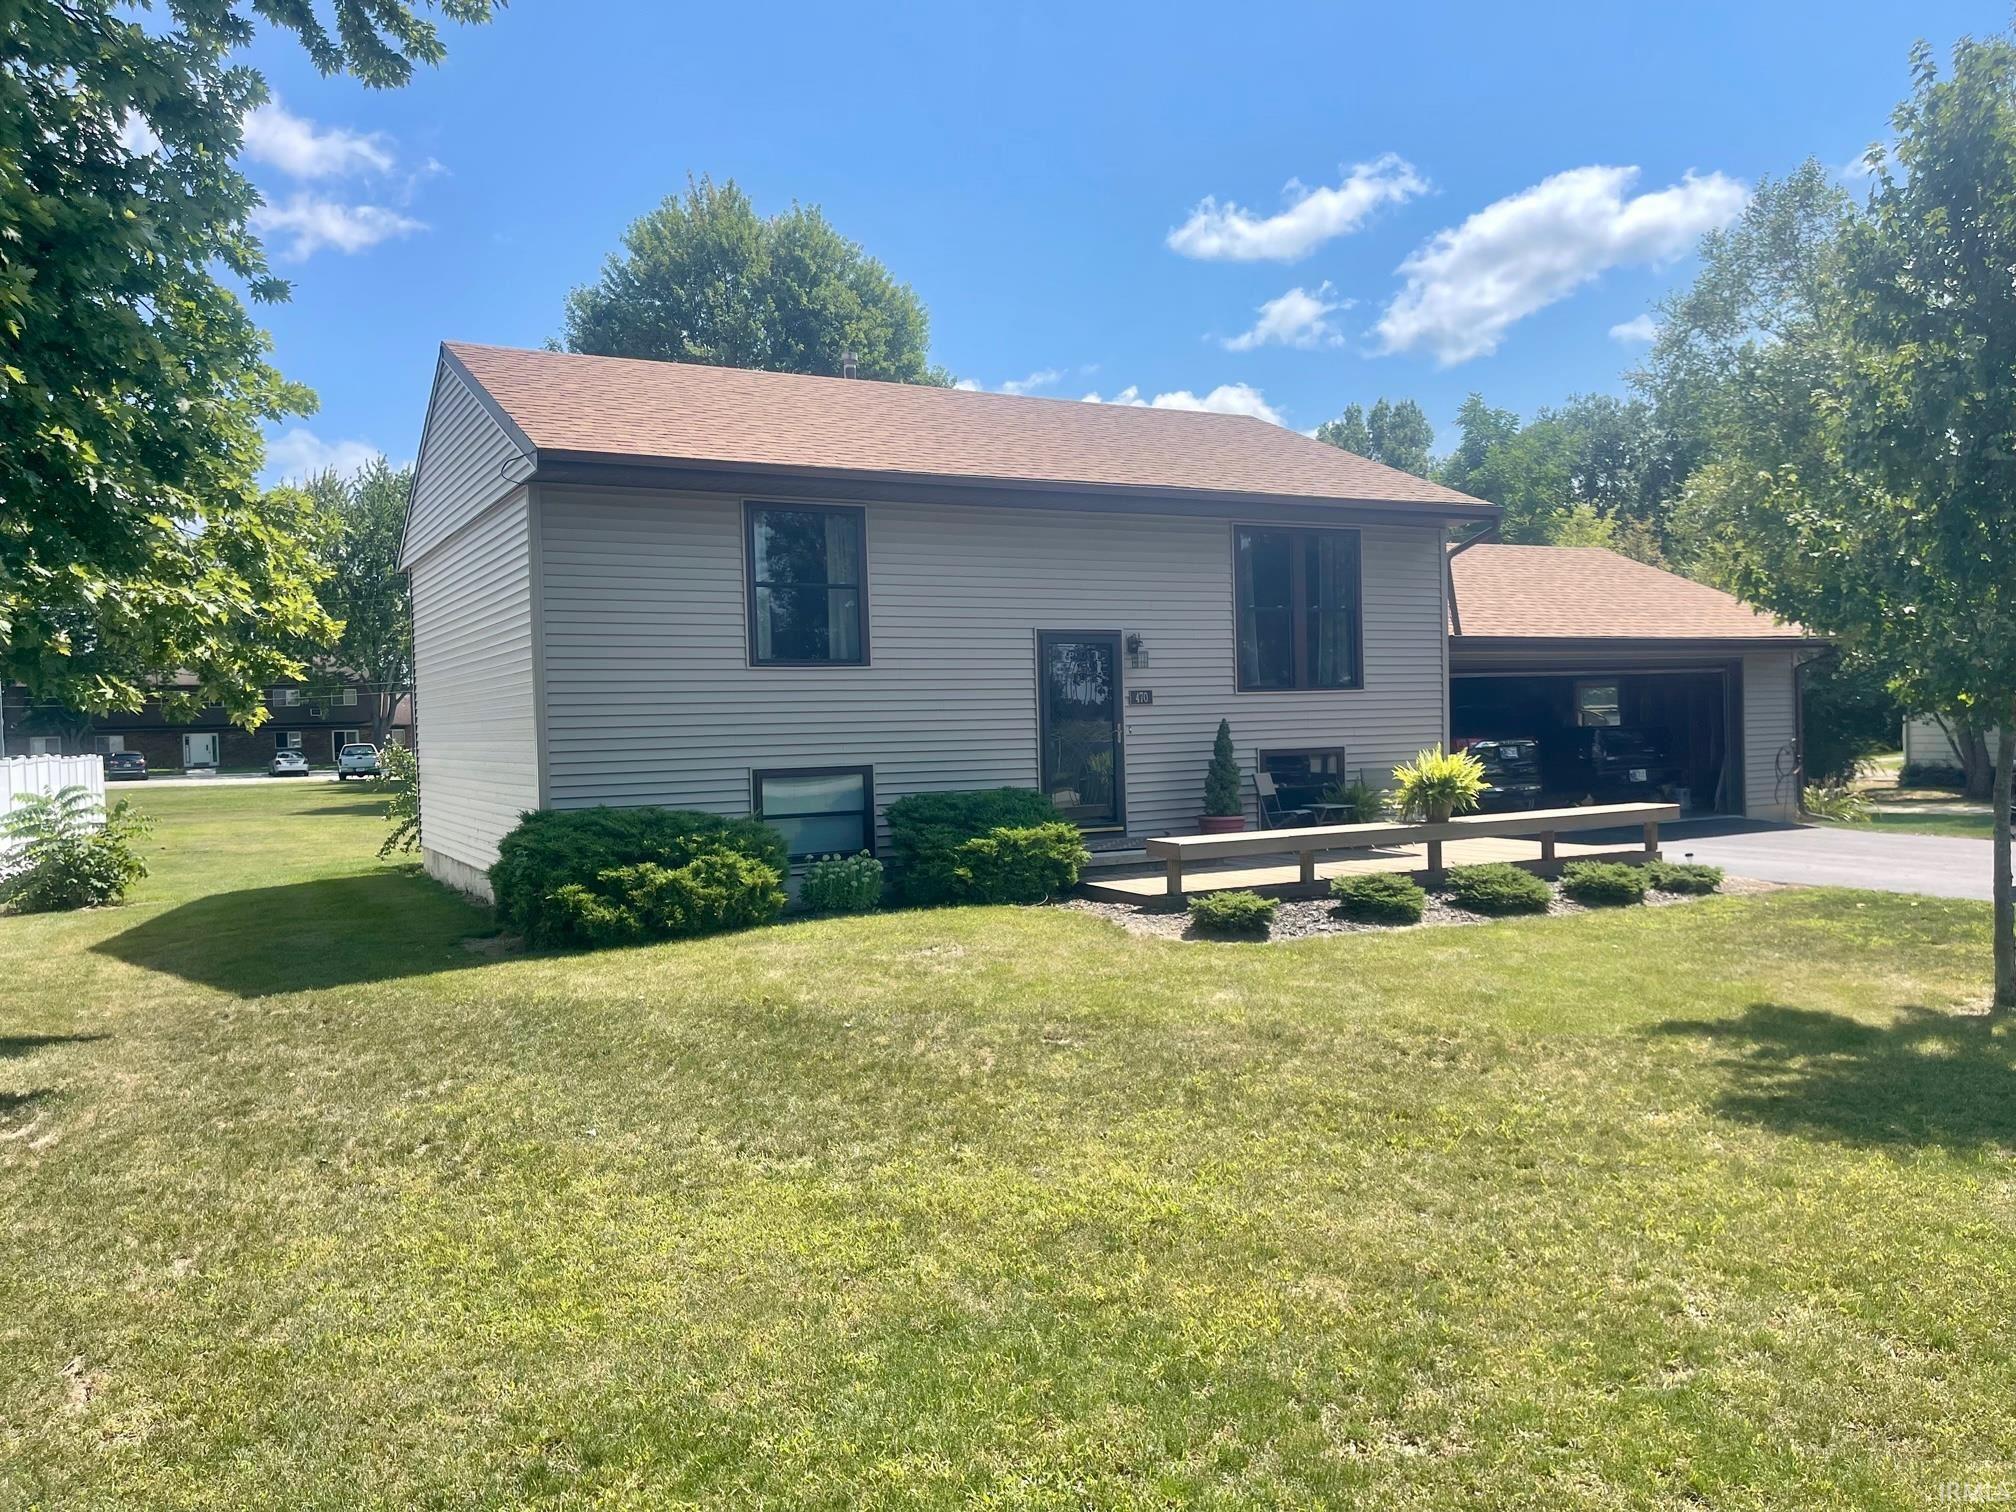 470 County Line, Markle, Indiana 46770, 3 Bedrooms Bedrooms, 6 Rooms Rooms,2 BathroomsBathrooms,Residential,For Sale,County Line,202239153